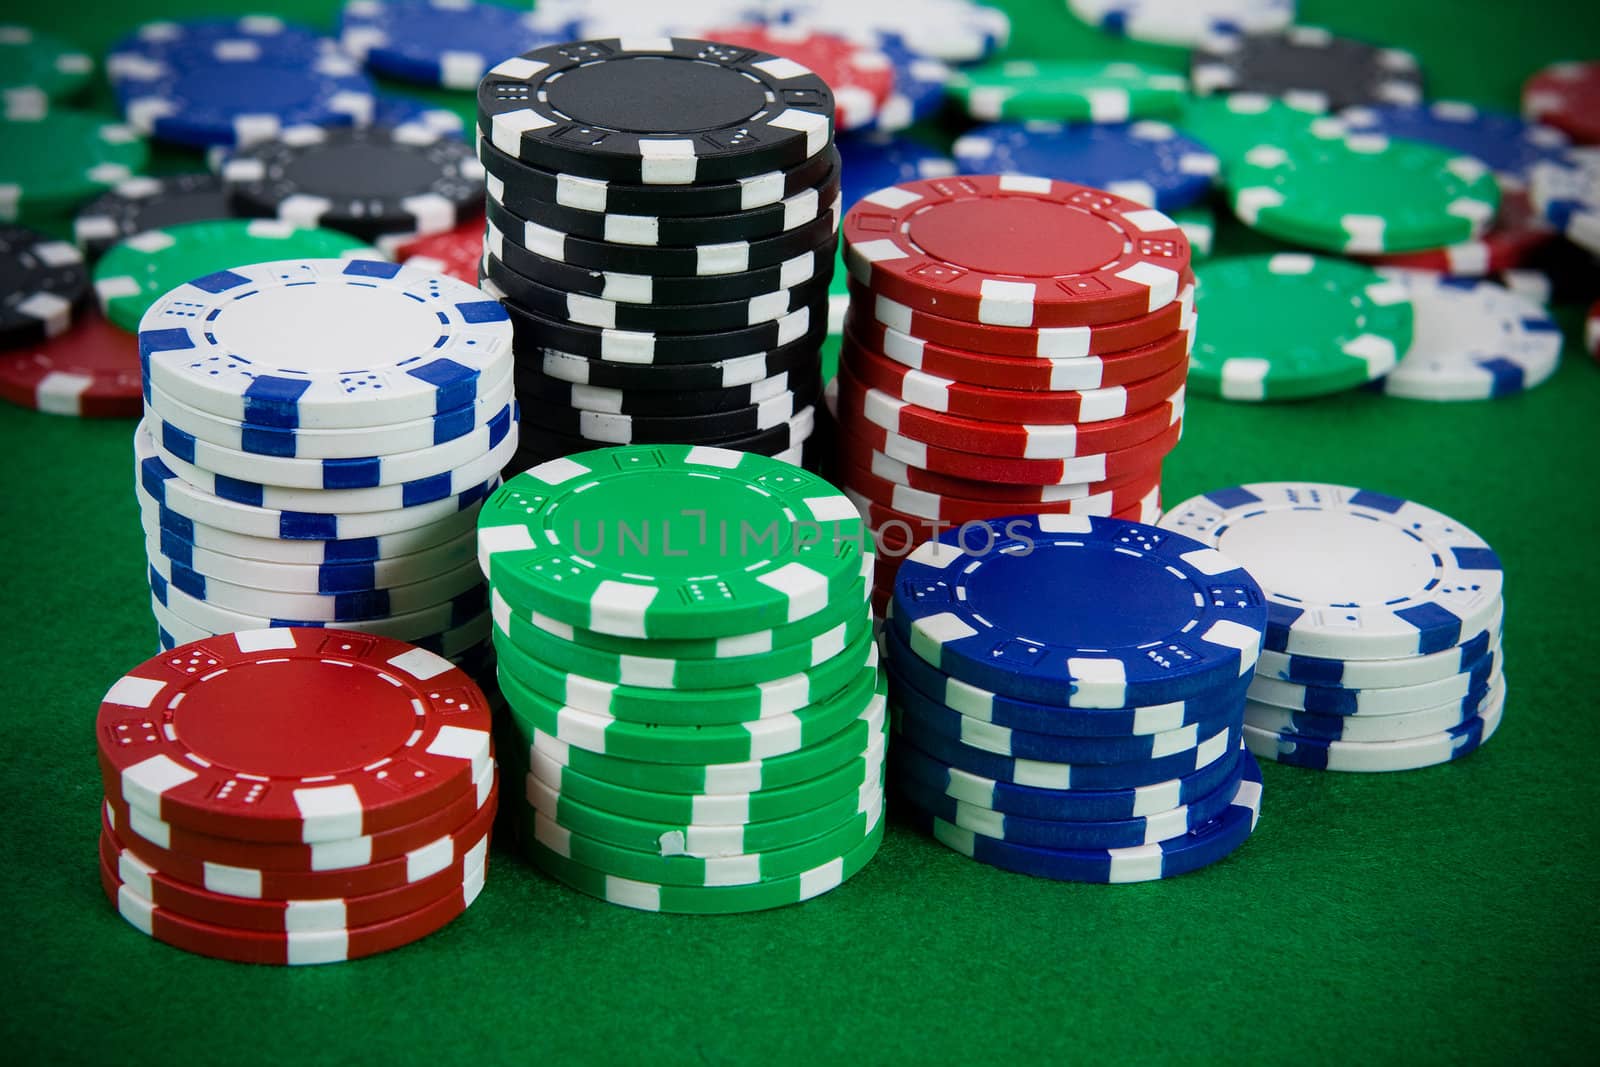 Lot of poker chips on green background.